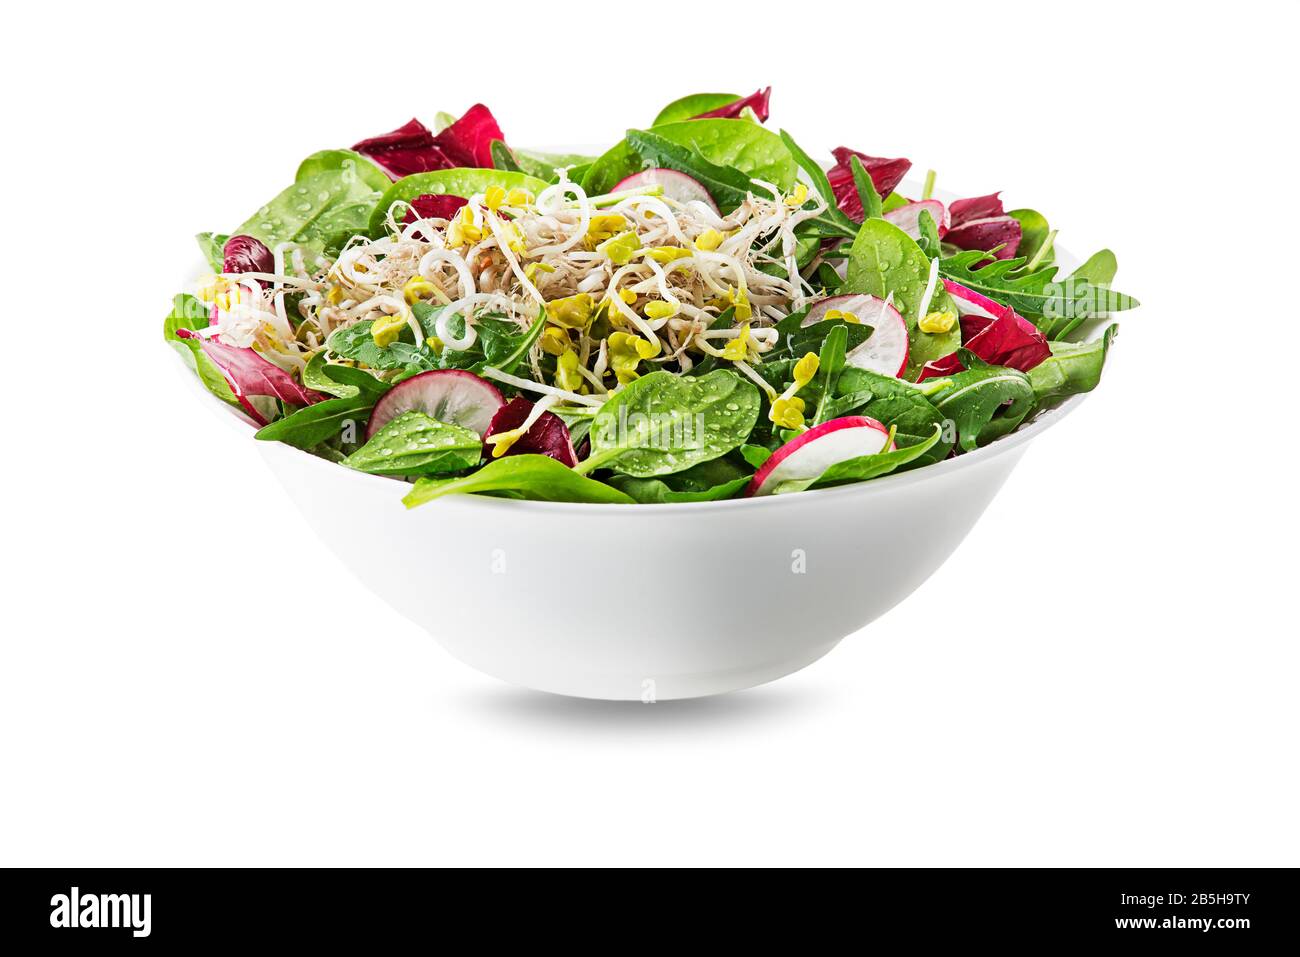 Healthy green salad meal with alfalfa sprouts isolated on white background Stock Photo